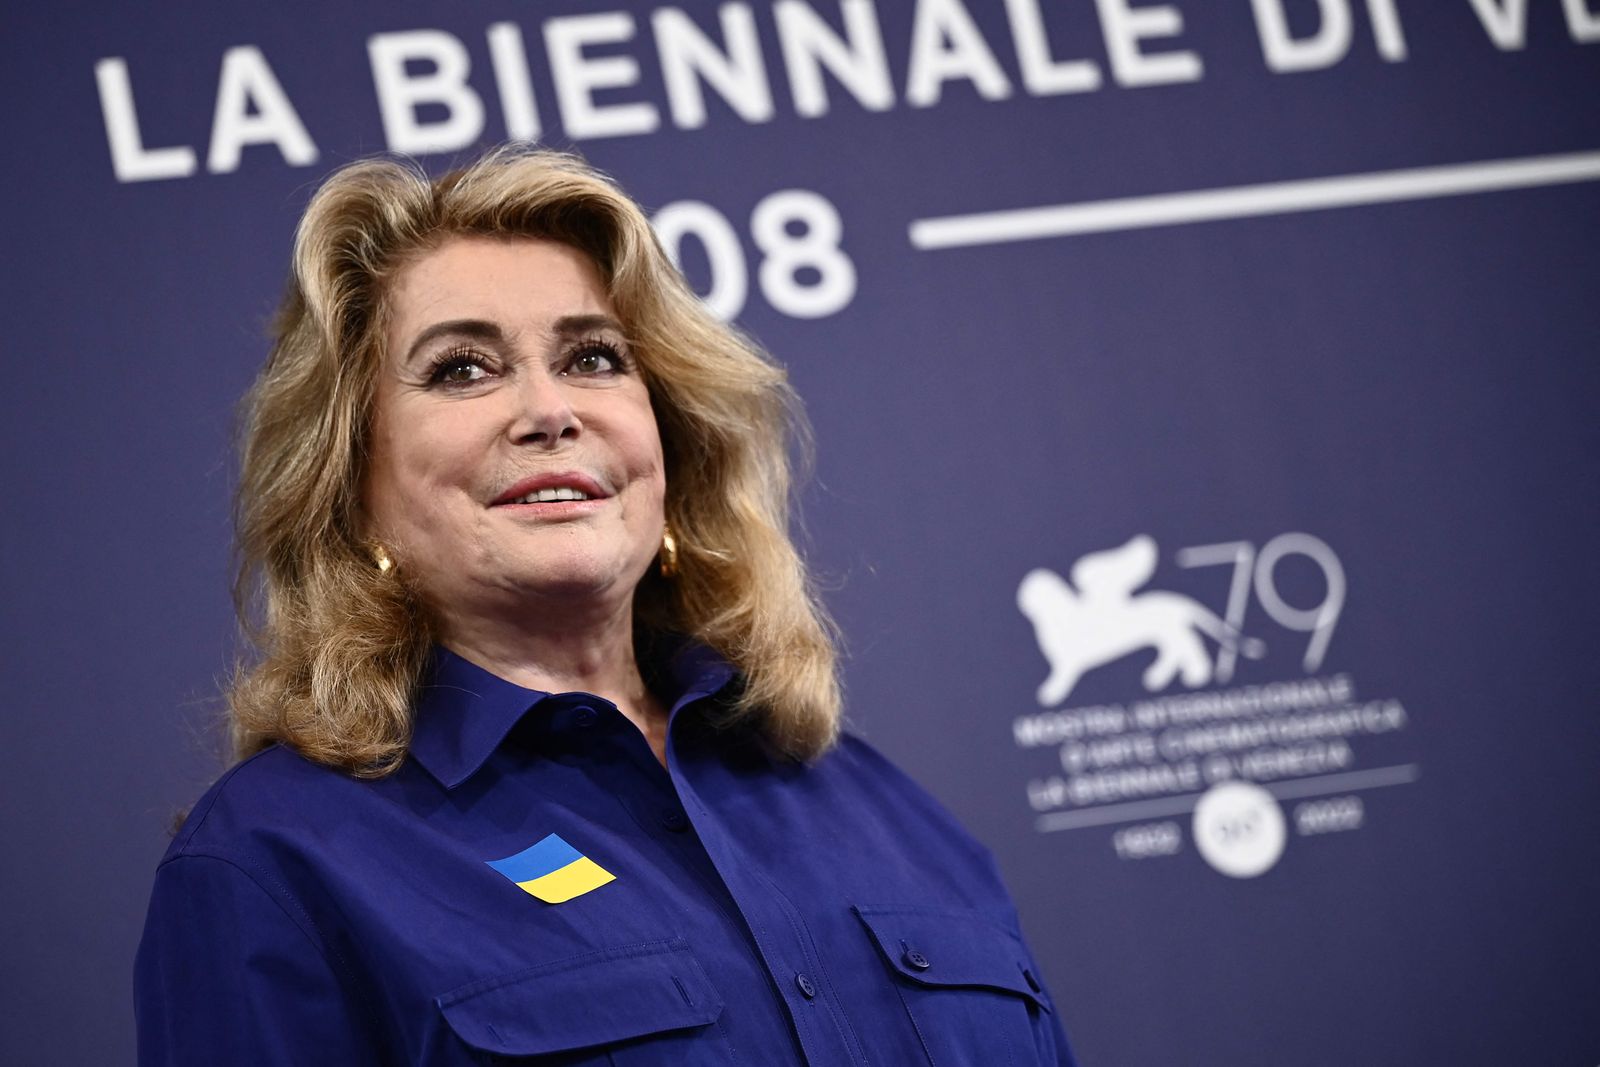 French actress Catherine Deneuve, wearing a flag of Ukraine on her shirt, poses on August 31, 2022, during a photocall for the Golden Lion for Lifetime Achievement she is to be awarded, on the opening day of the 79th Venice International Film Festival at Venice Lido. (Photo by Marco BERTORELLO / AFP) - AFP